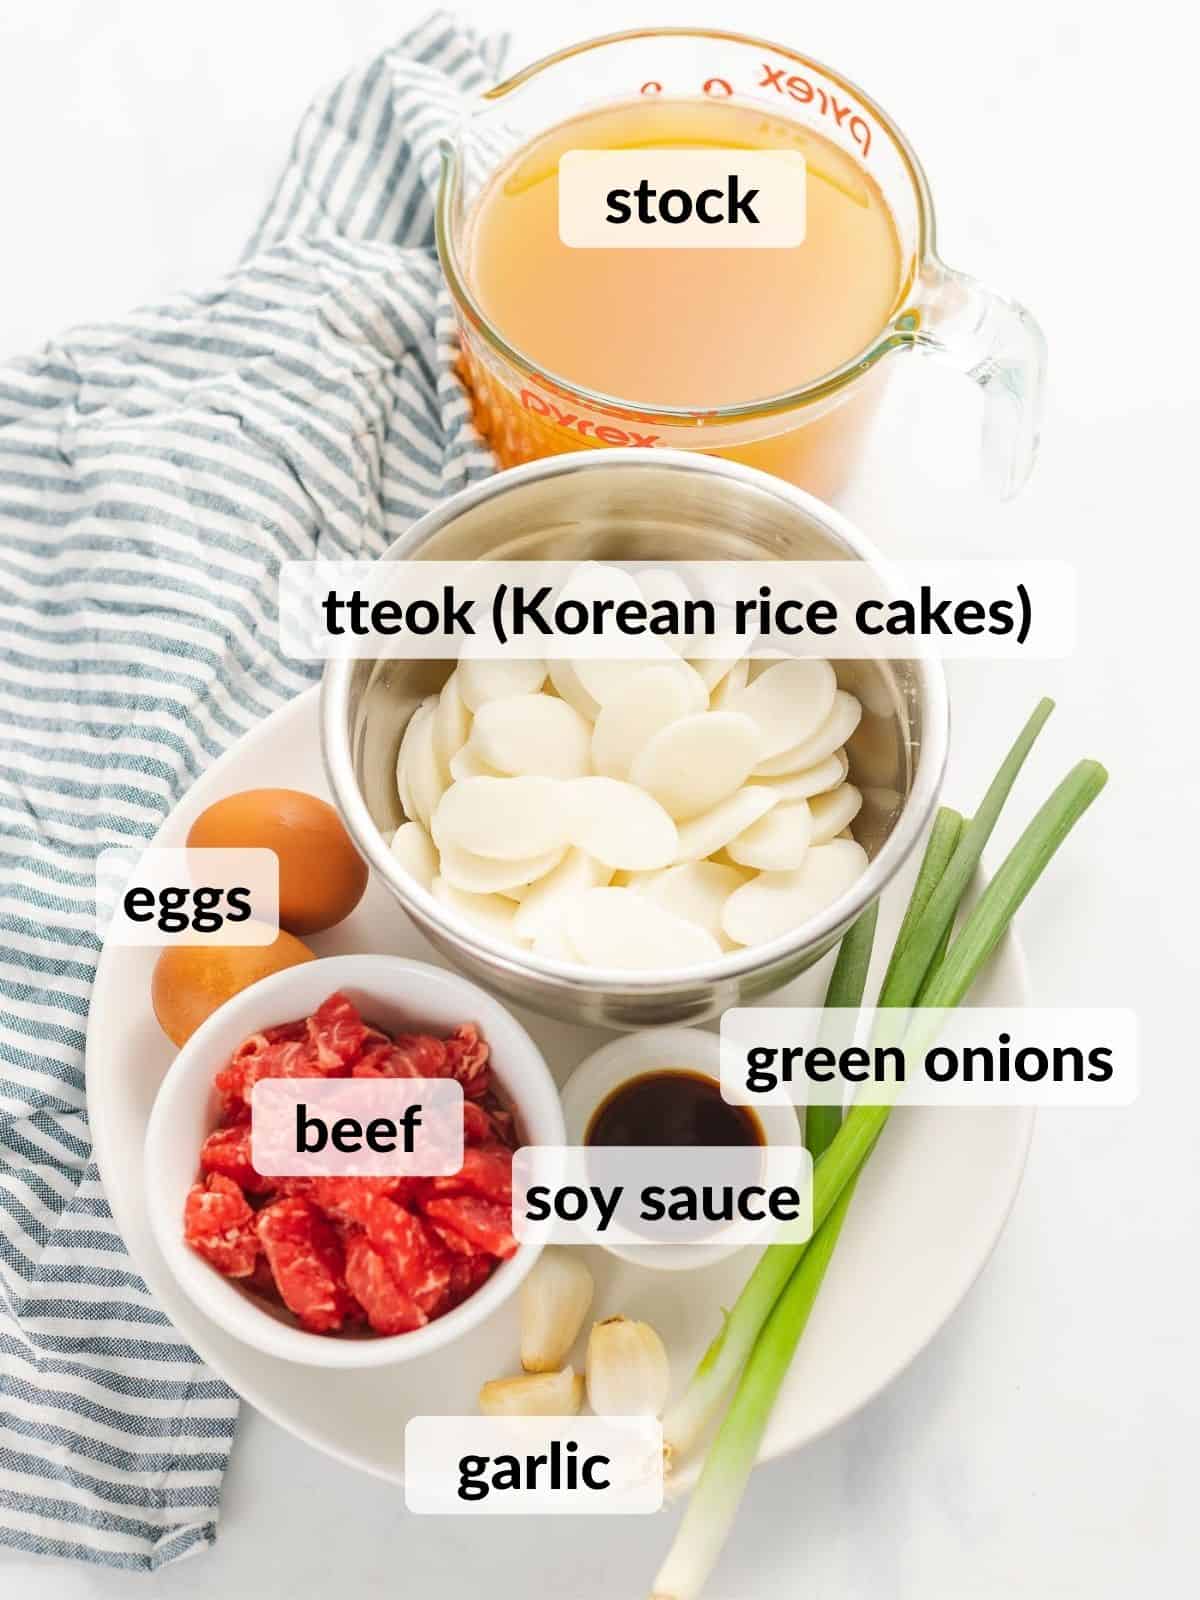 Ingredients for tteokguk including rice cakes, beef, stock, and eggs.